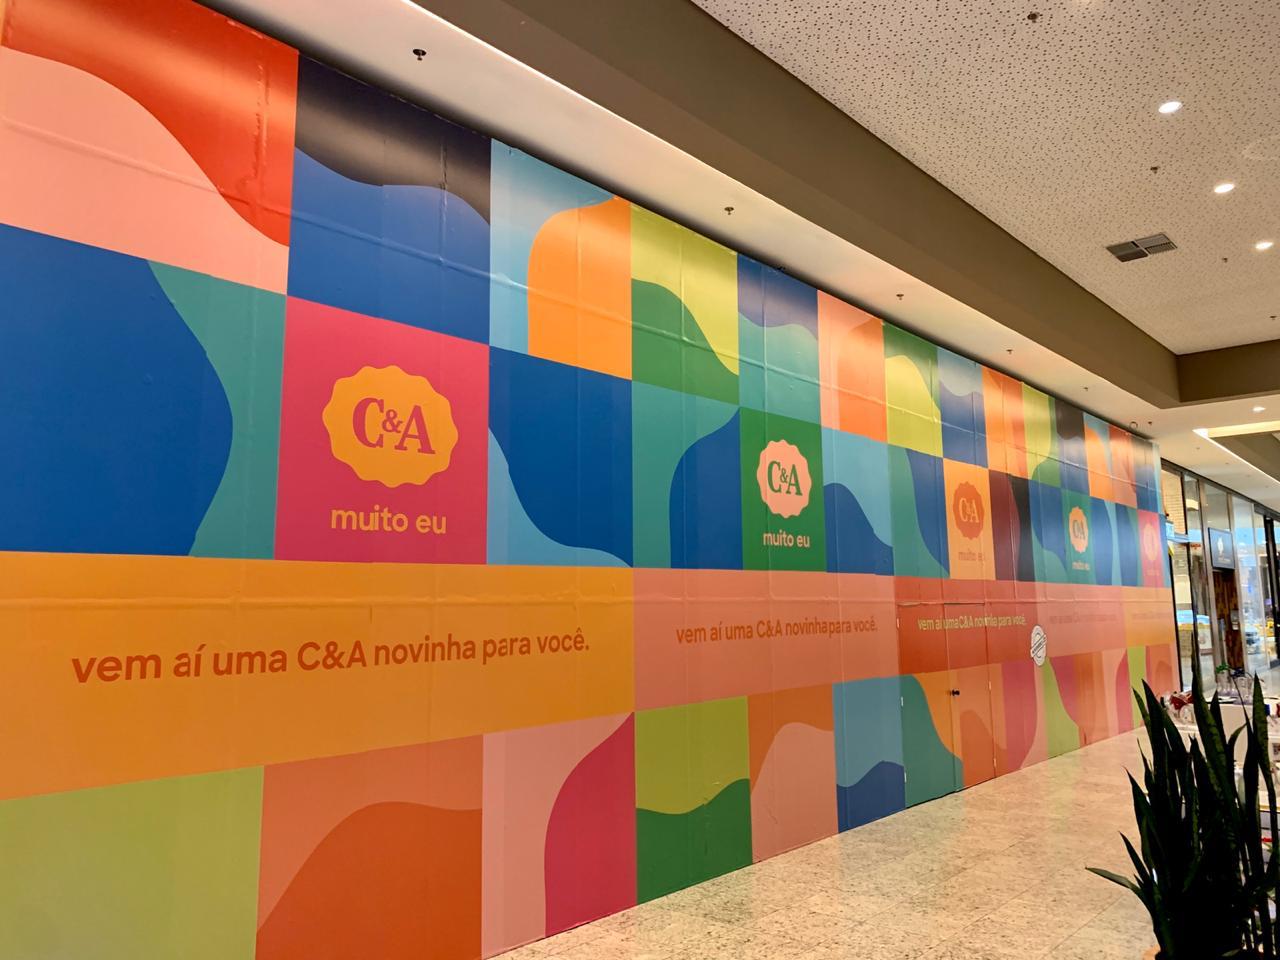 Nações Shopping will receive the first C&A store in southern Santa Catarina